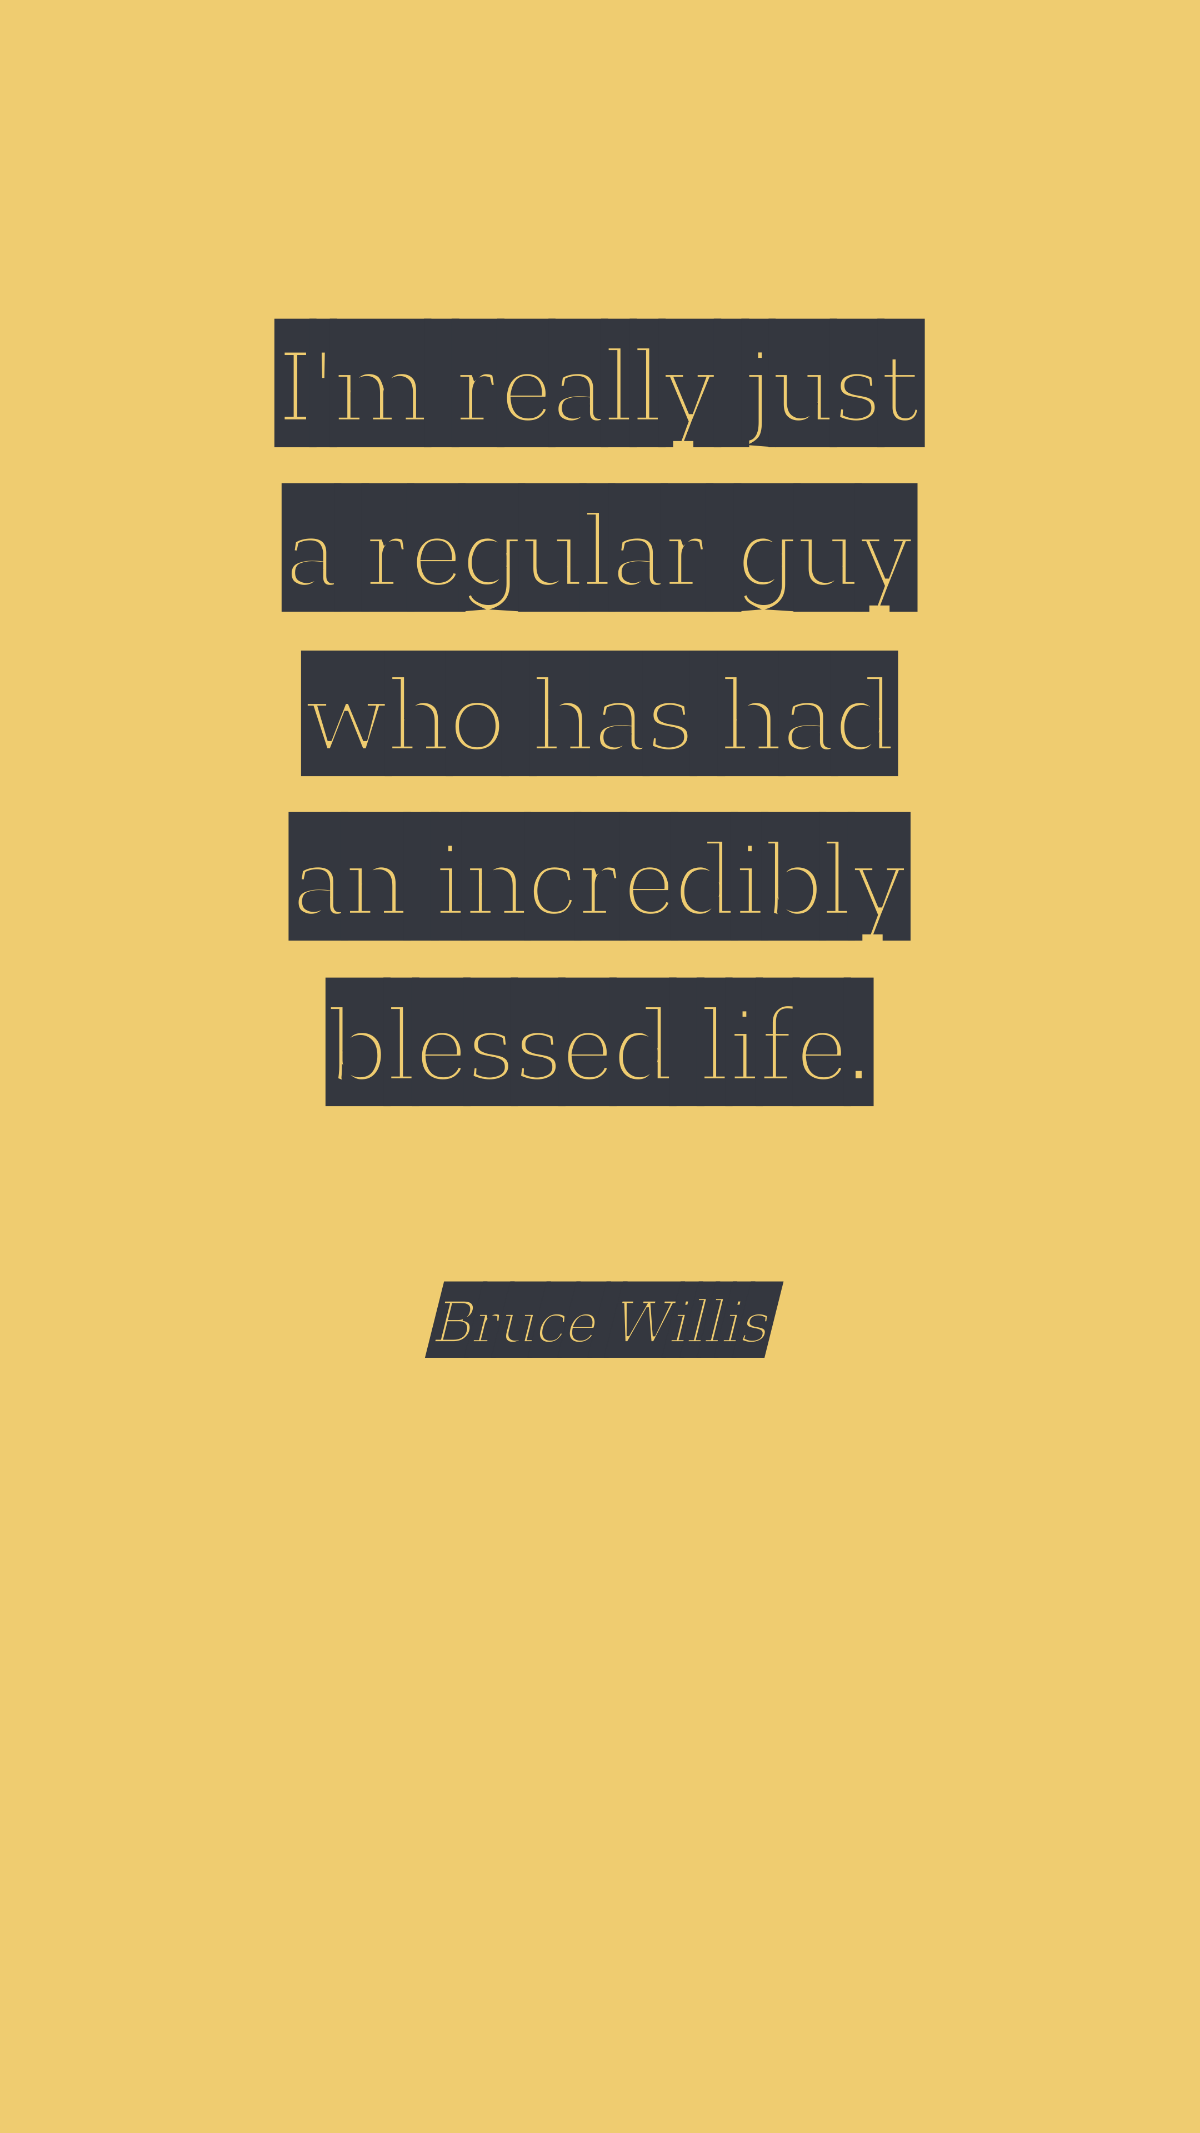 Bruce Willis - I'm really just a regular guy who has had an incredibly blessed life. Template